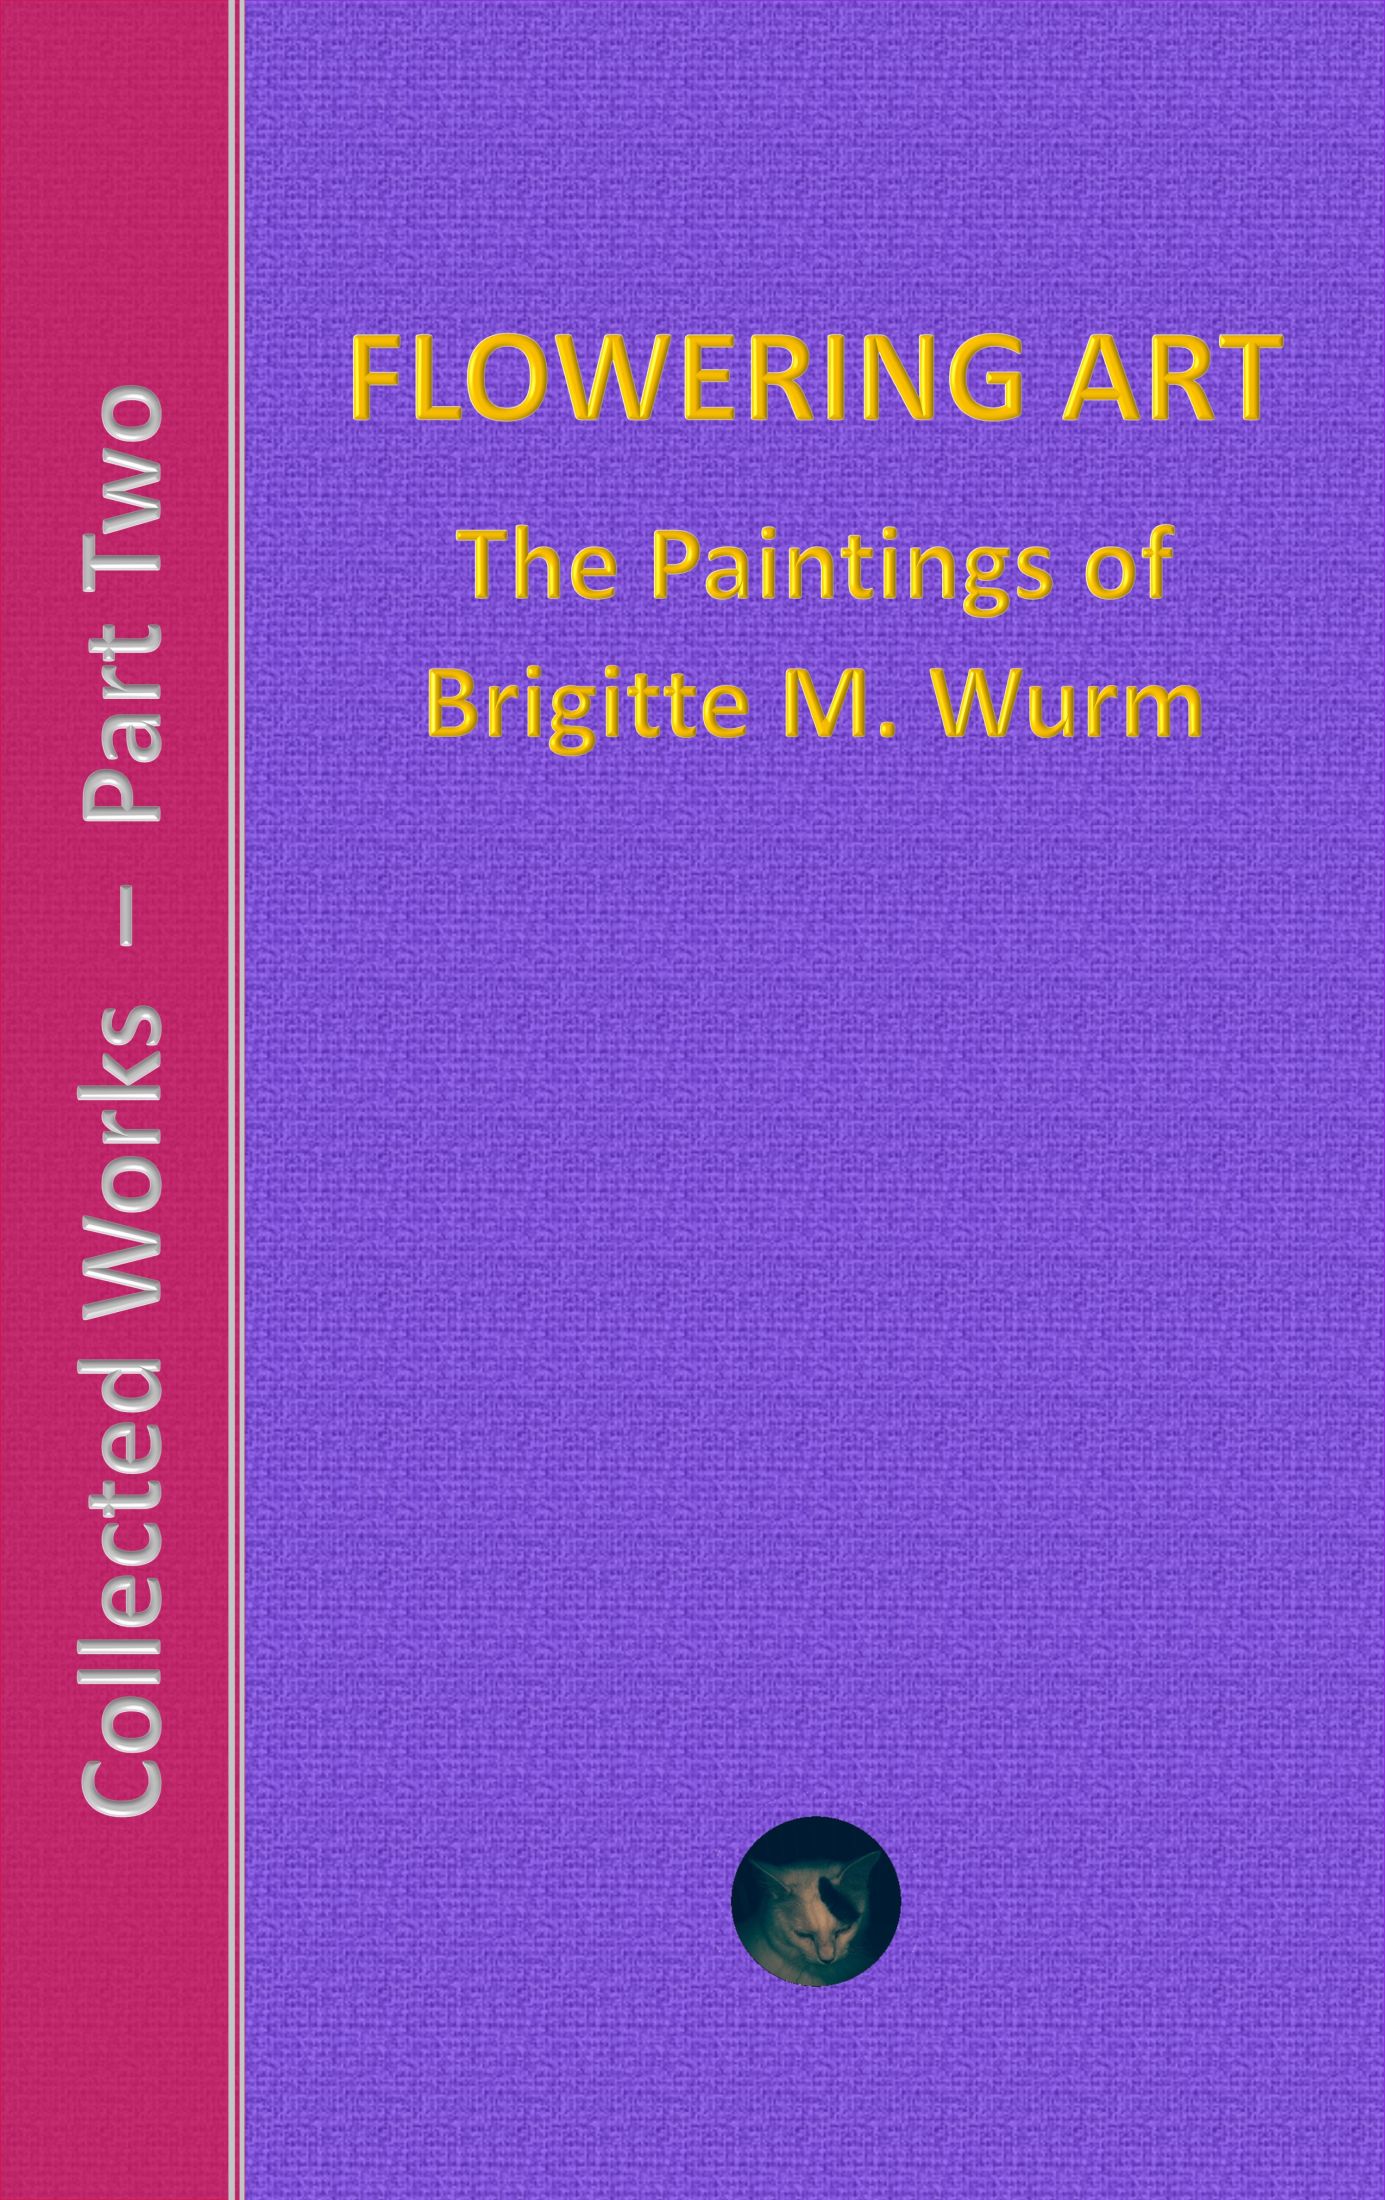 Brigitte M. Wurm: Collected Works - Part Two